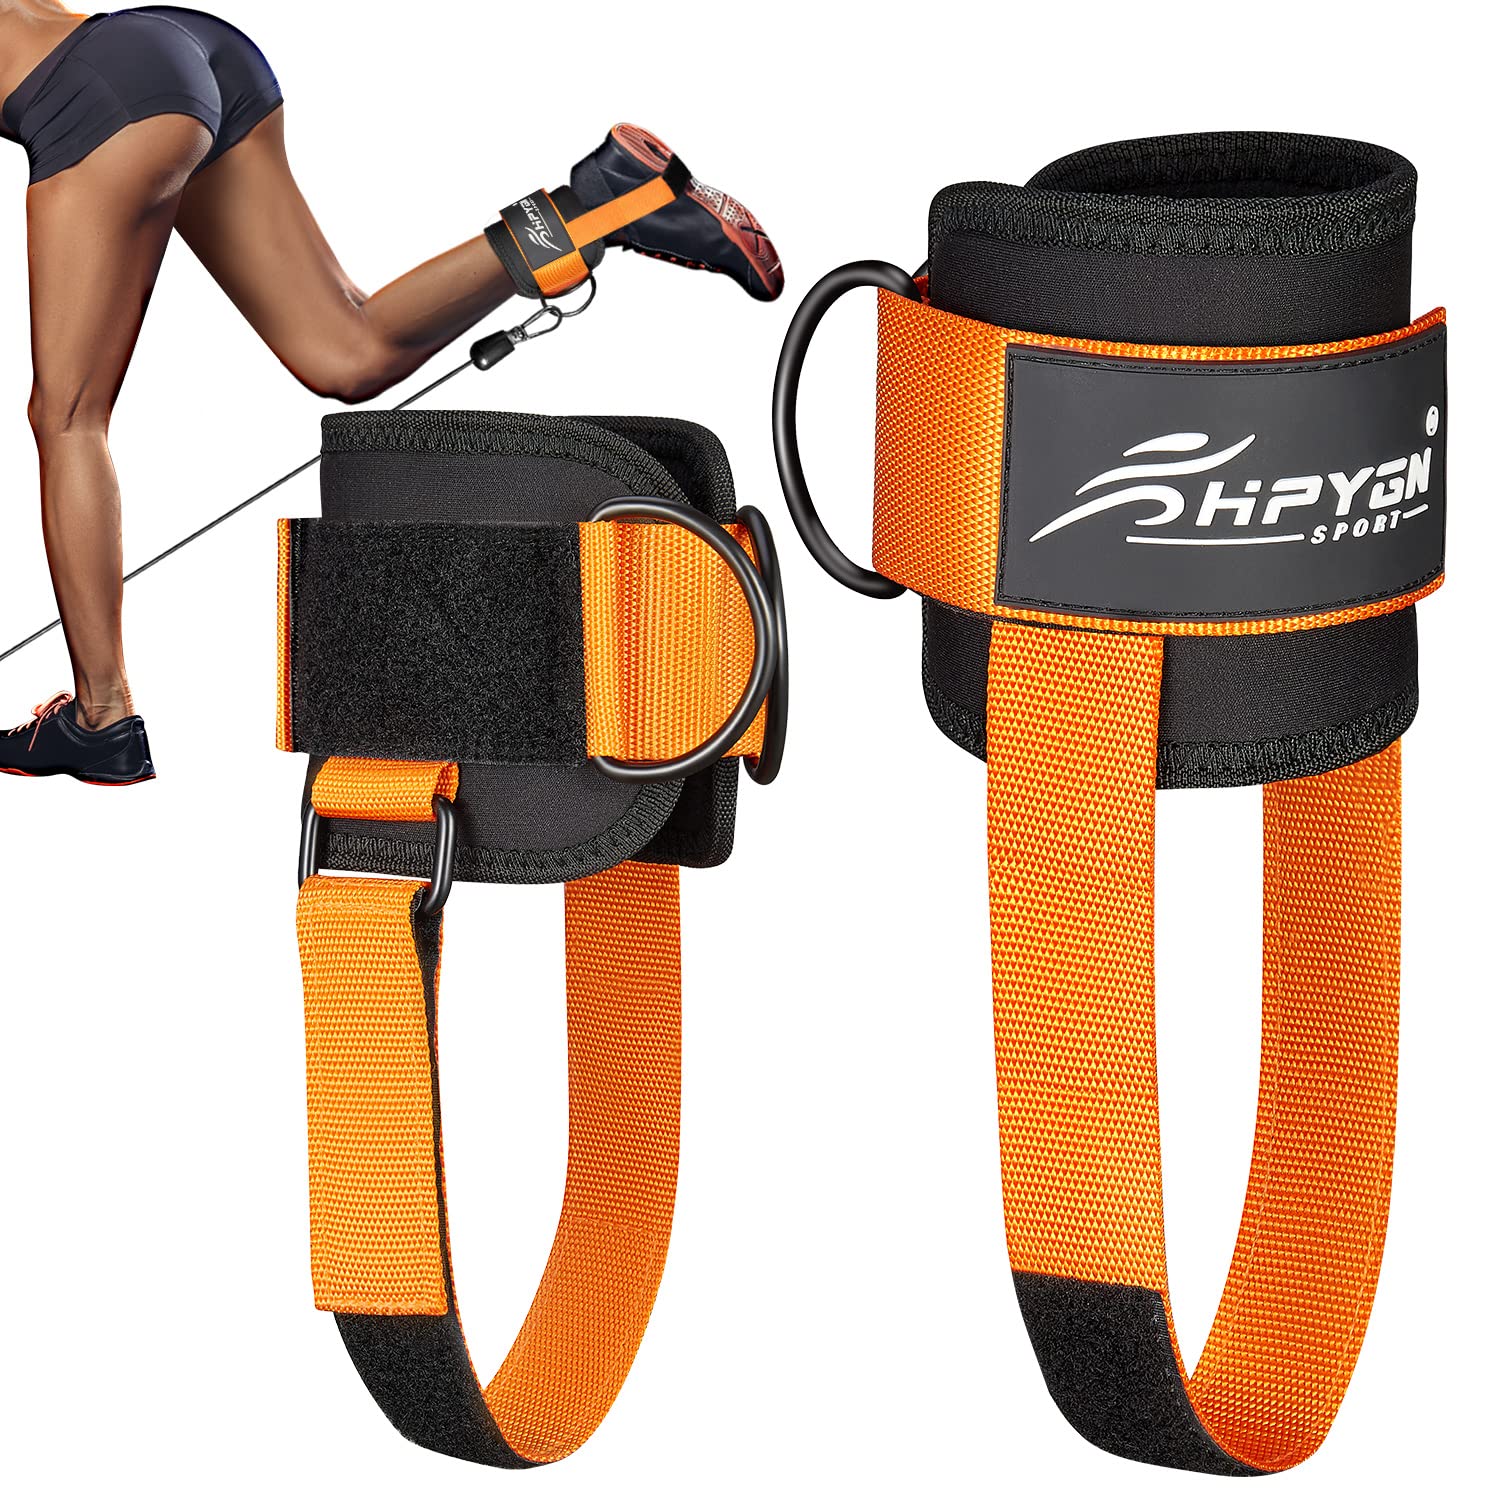 HPYGN Ankle Strap for Cable Machine, Padded Ankle Straps for Cable